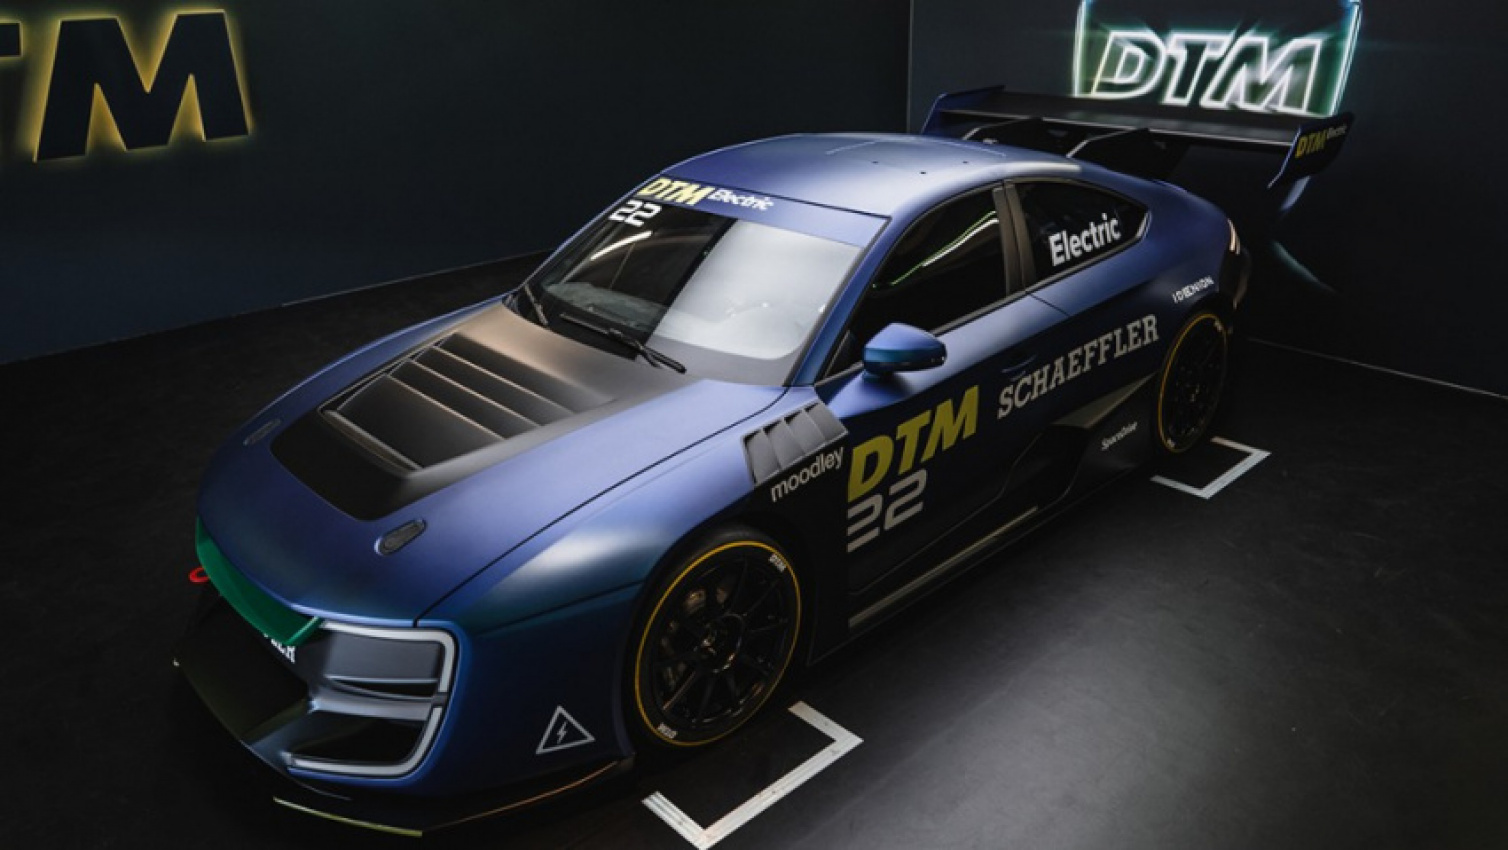 autos, cars, electric cars, electrification, europe, regions, tech innovation, schaeffler to kick off dtm electric racing series in 2023